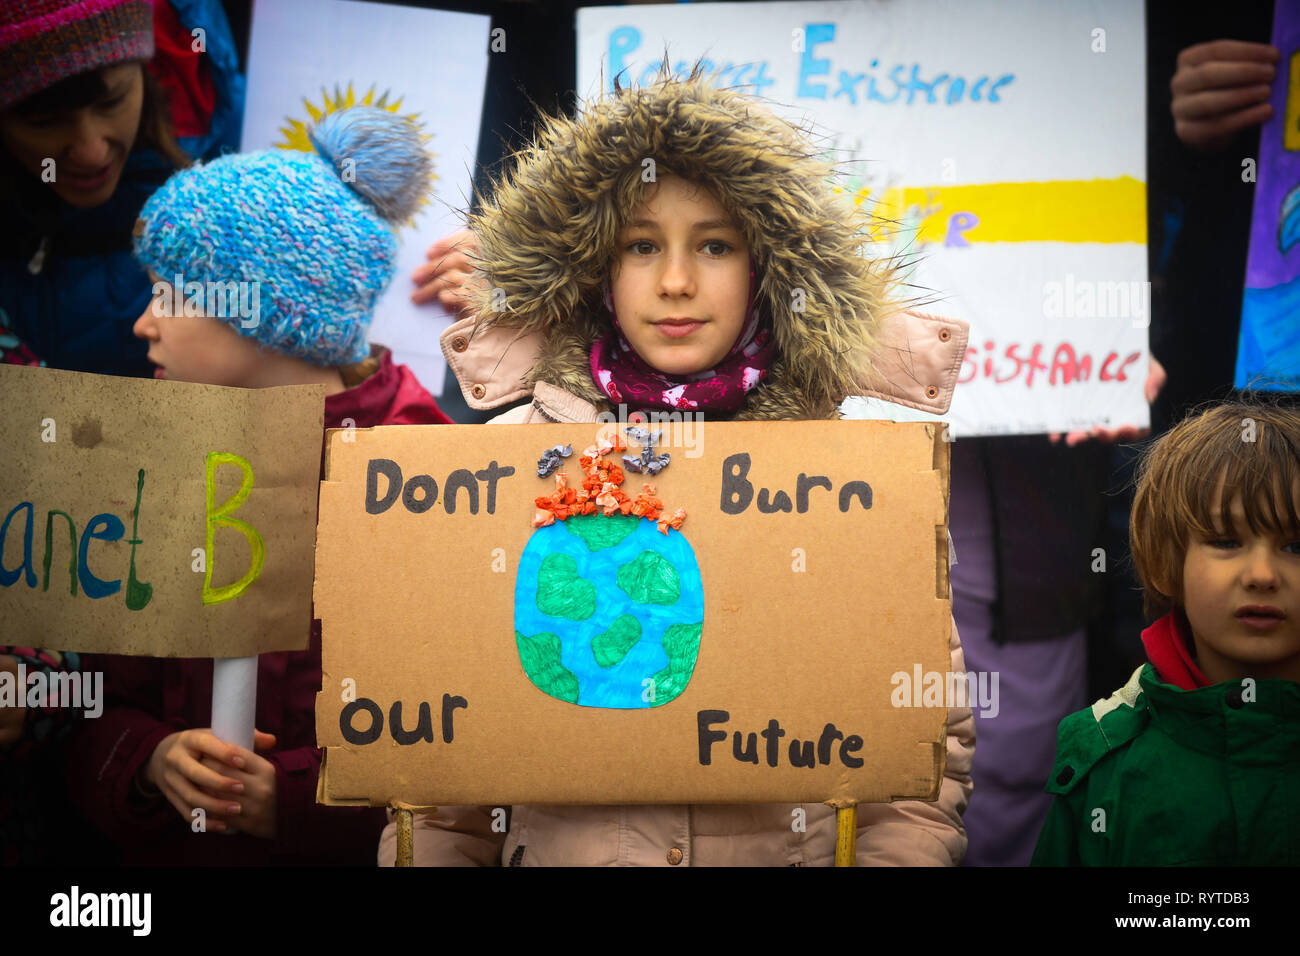 Swansea, Wales, UK. 15th March 2019 Pictured are students and children marching through the steet's of the city of Swansea in South Wales, UK, in the latest climate change protests. Inspired by 16-year-old environmental activist Greta Thunberg, who has accused world leaders of not doing enough to prevent climate change, youngster have taken to the streets in the UK and across the world to try and highlight the cause for positive action regarding climate change. Robert Melen/Alamy Live News. Stock Photo